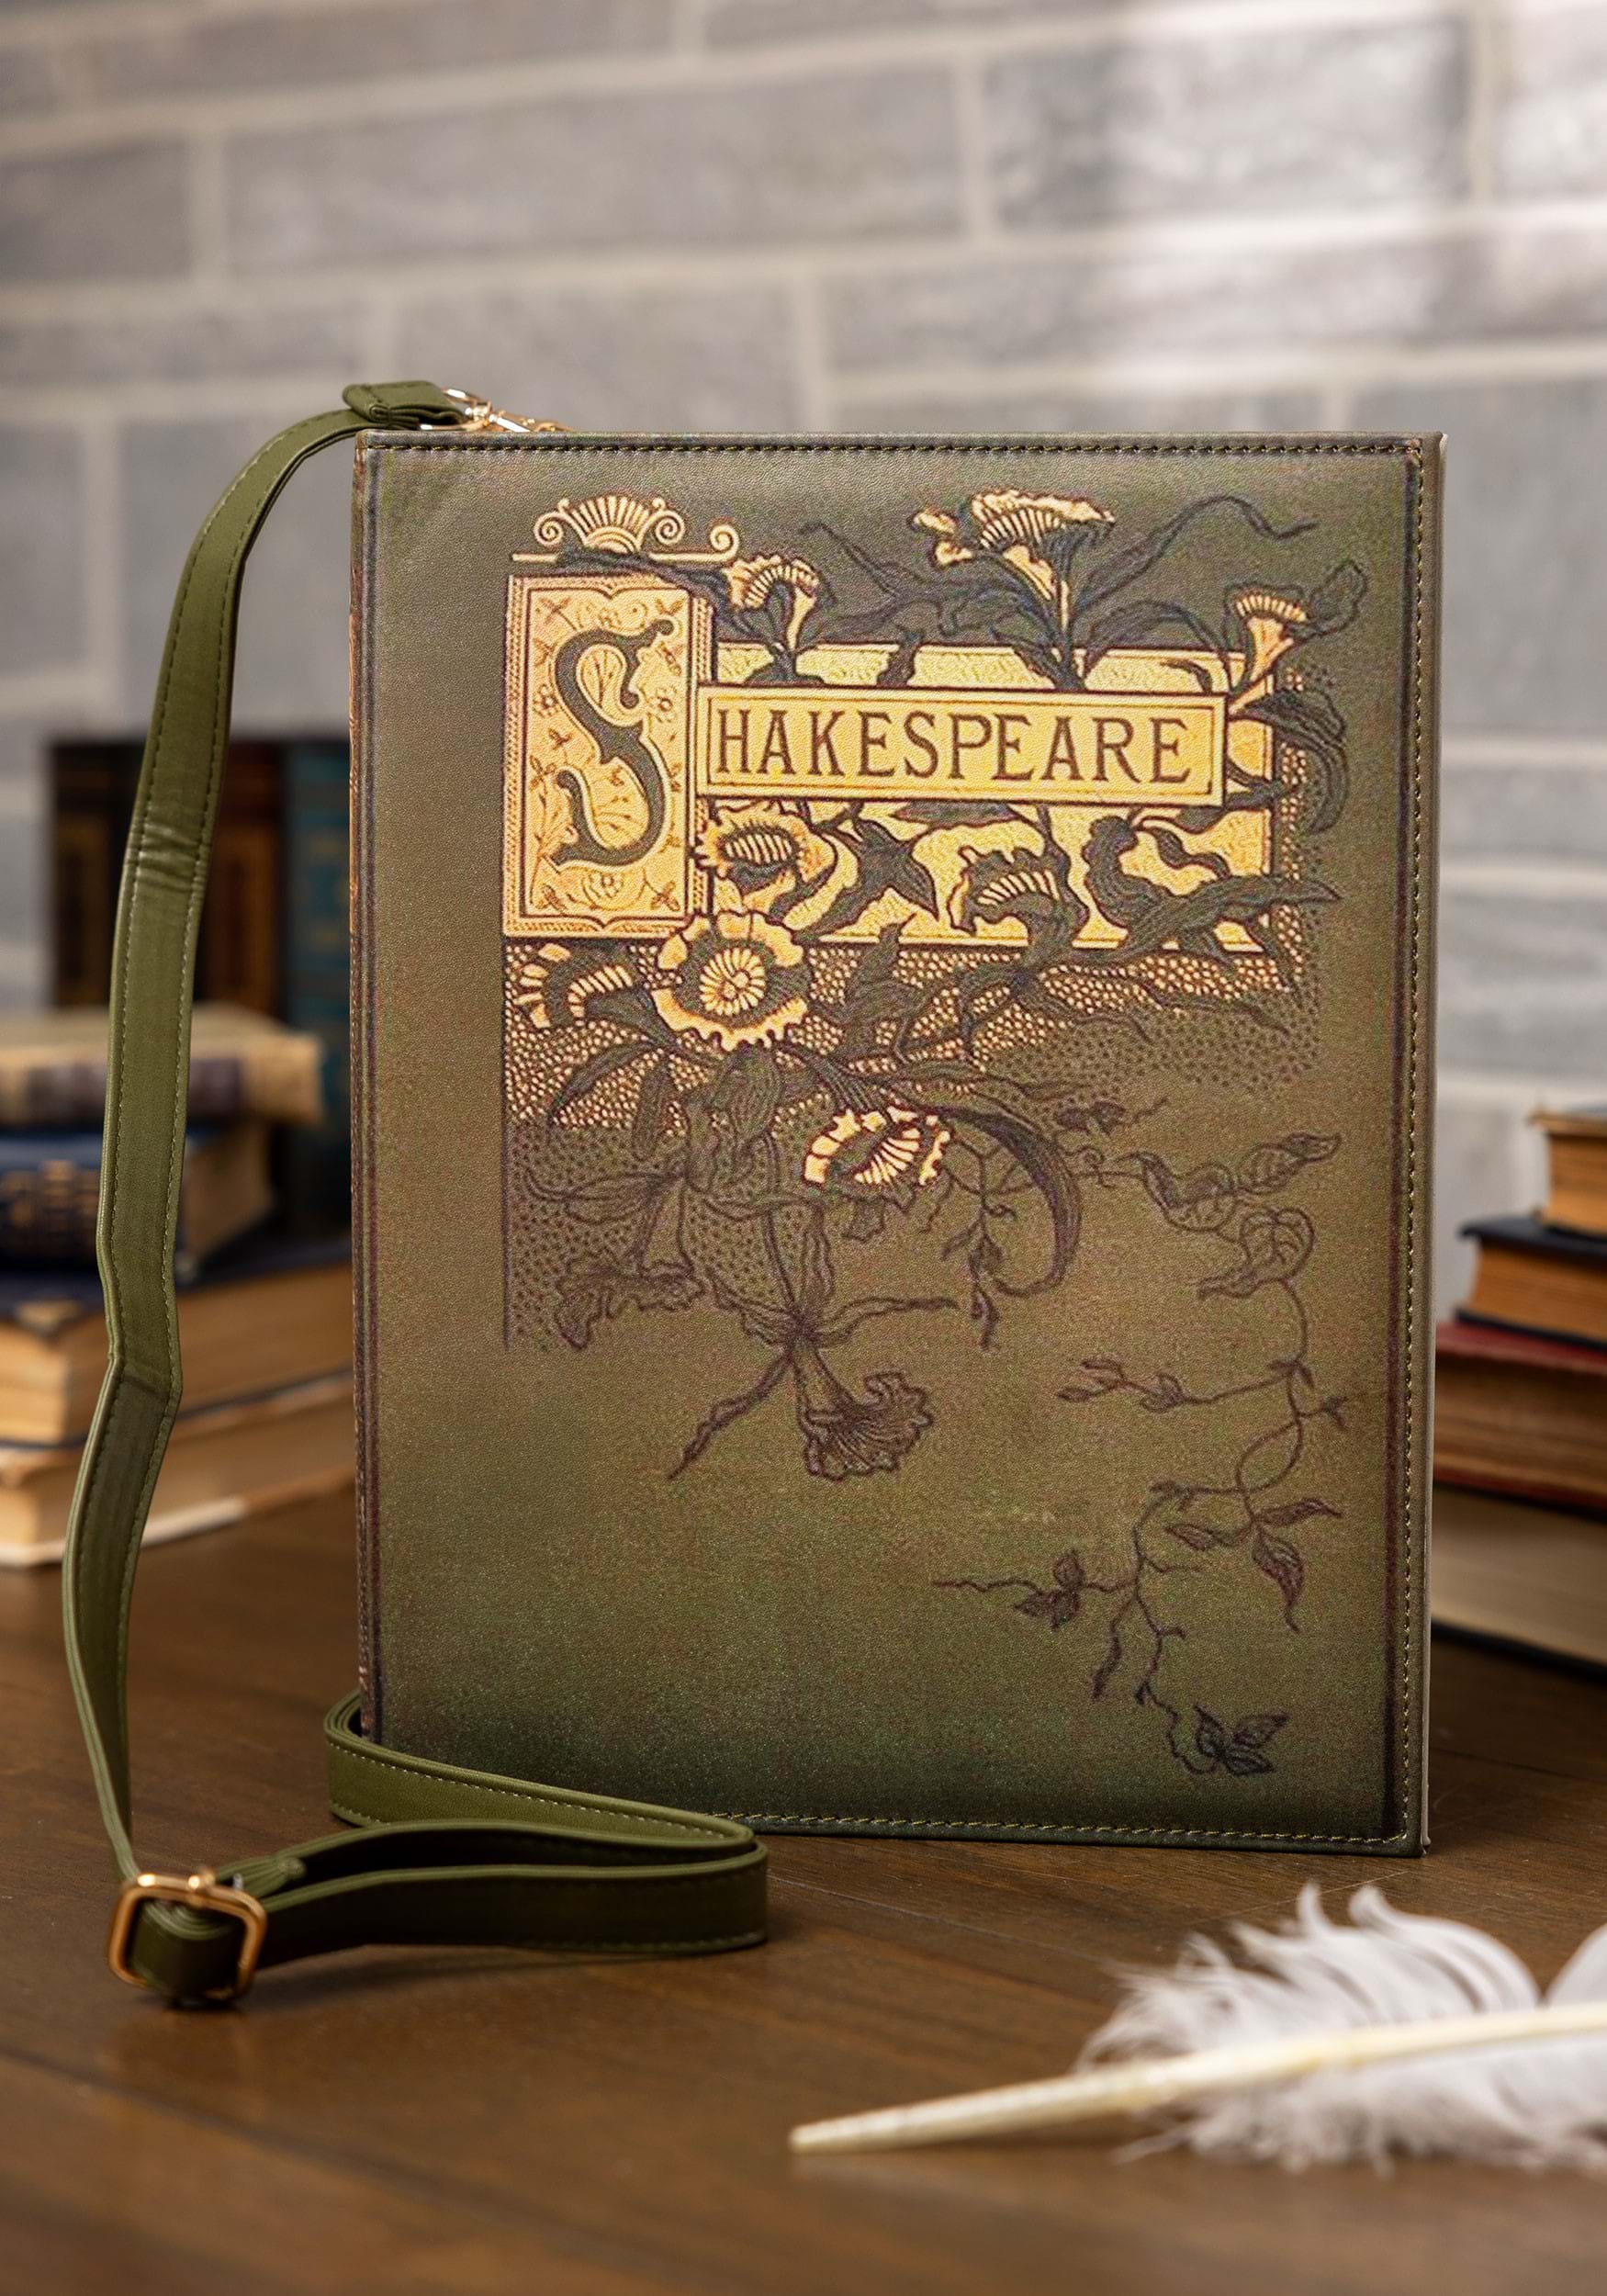 Shakespeare Book Fancy Dress Costume Bag , Historical Accessories